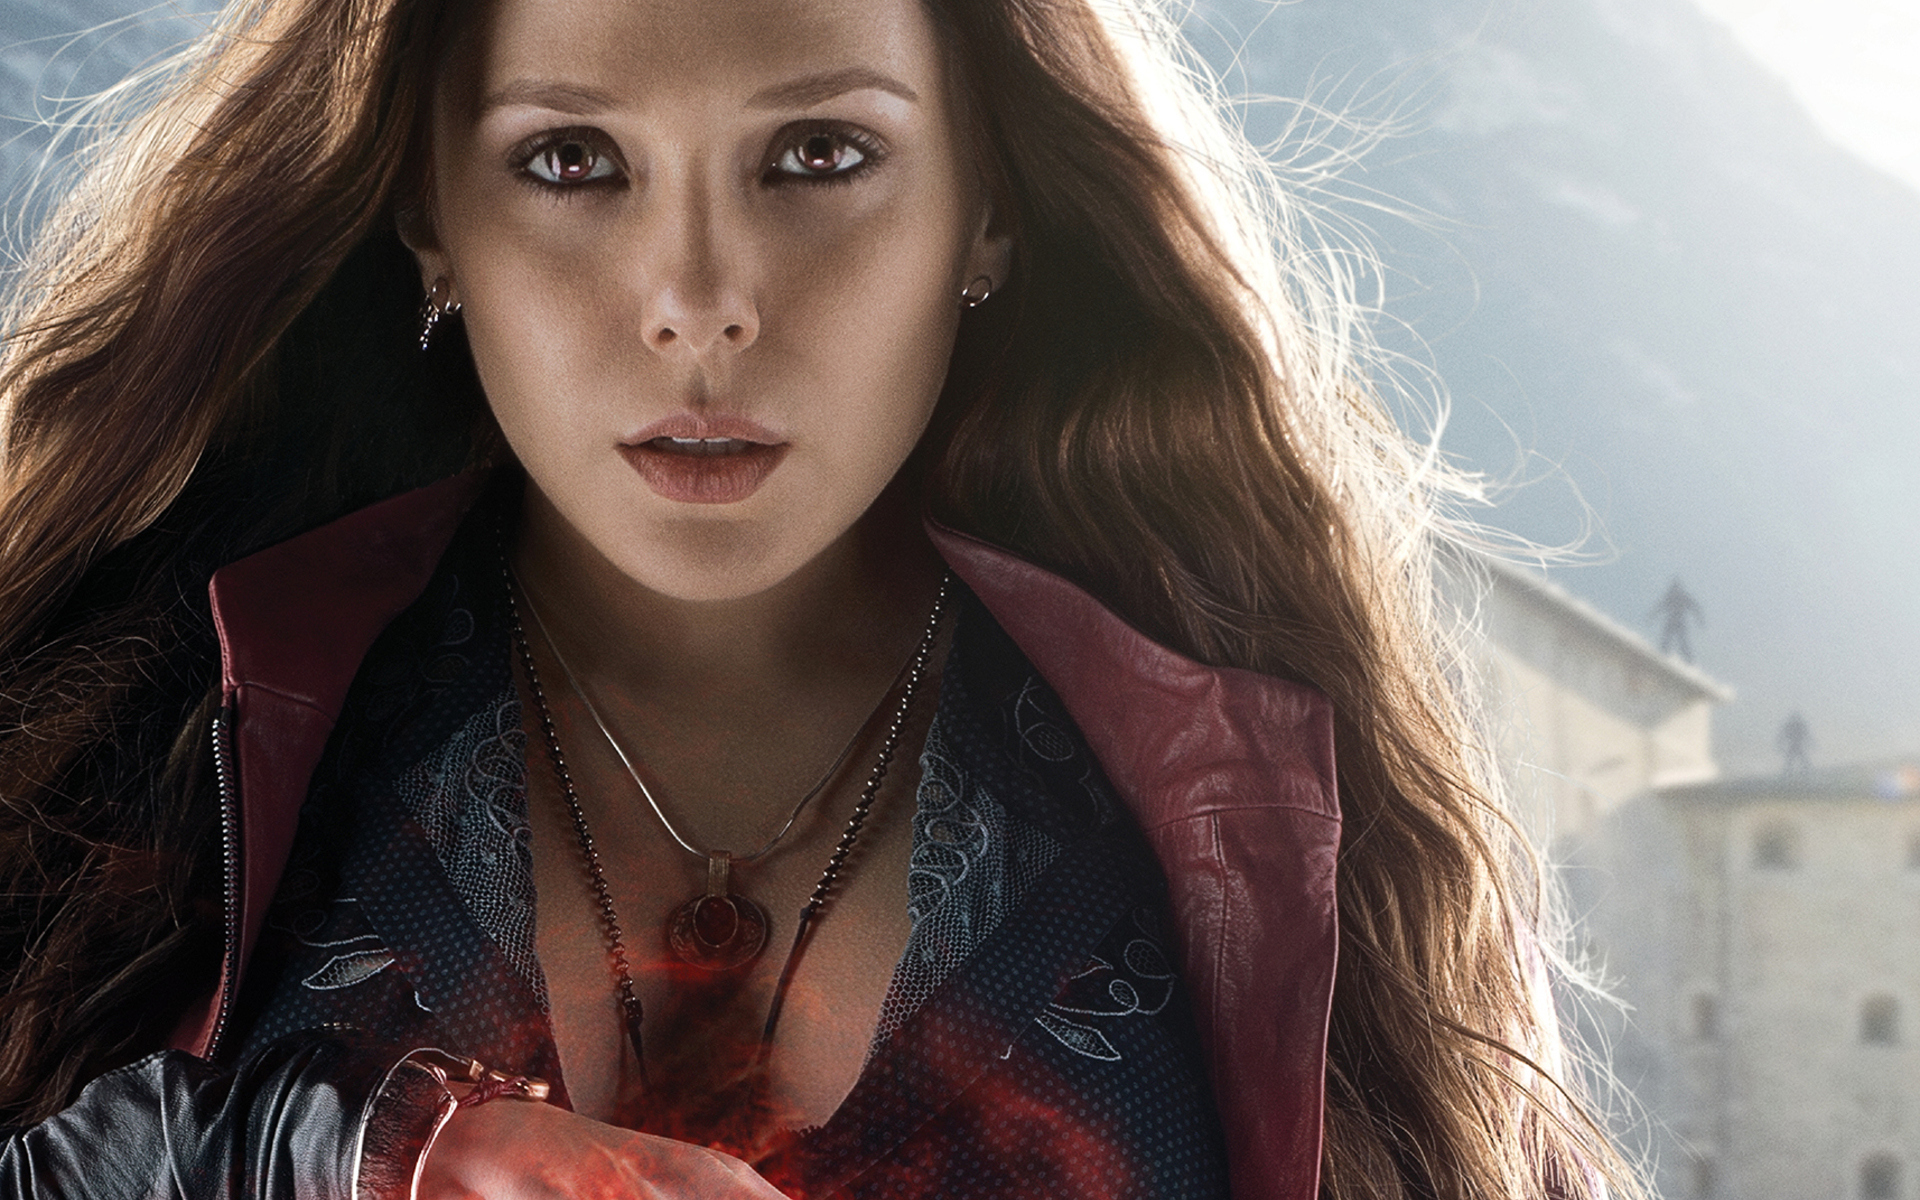 scarlet witch, magic, earrings, avengers, elizabeth olsen, long hair, movie, avengers: age of ultron, necklace, red eyes, redhead, the avengers